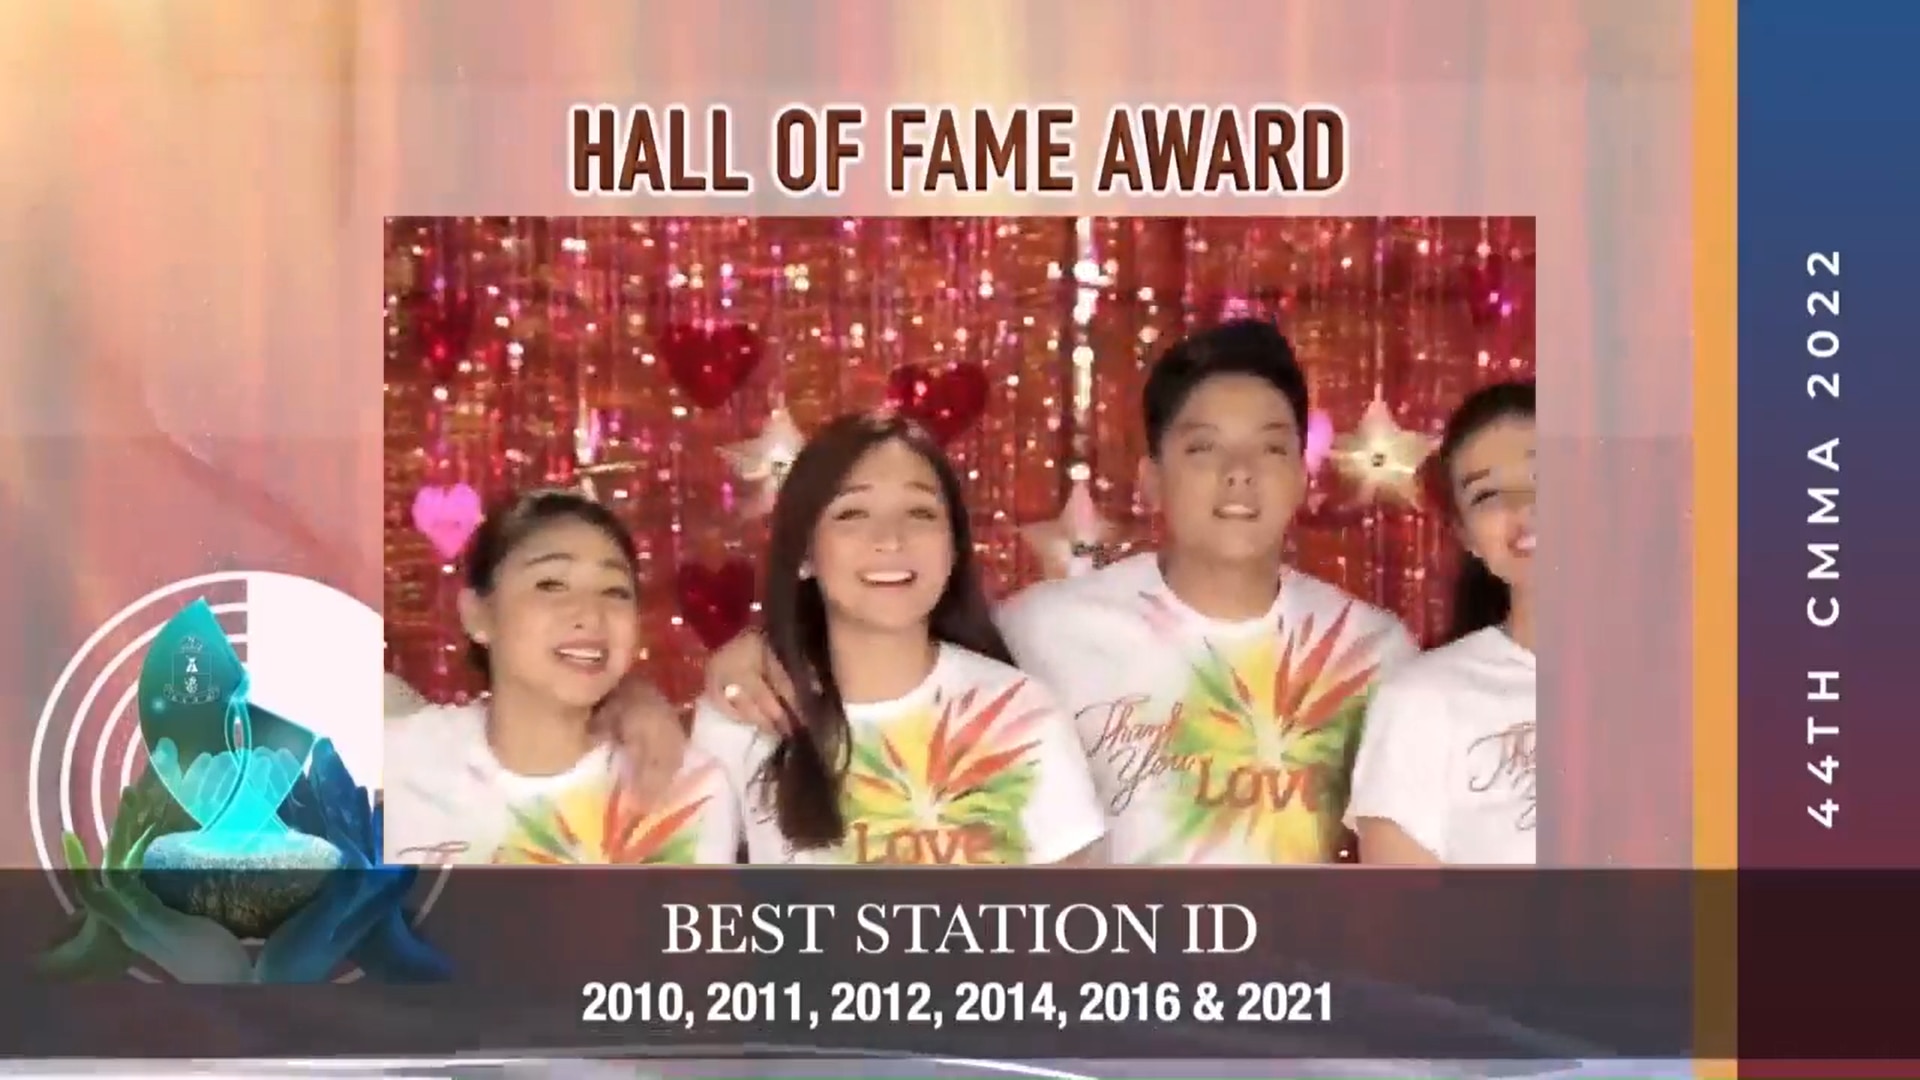 ABS CBN WINS HALL OF FAME AWARD 2